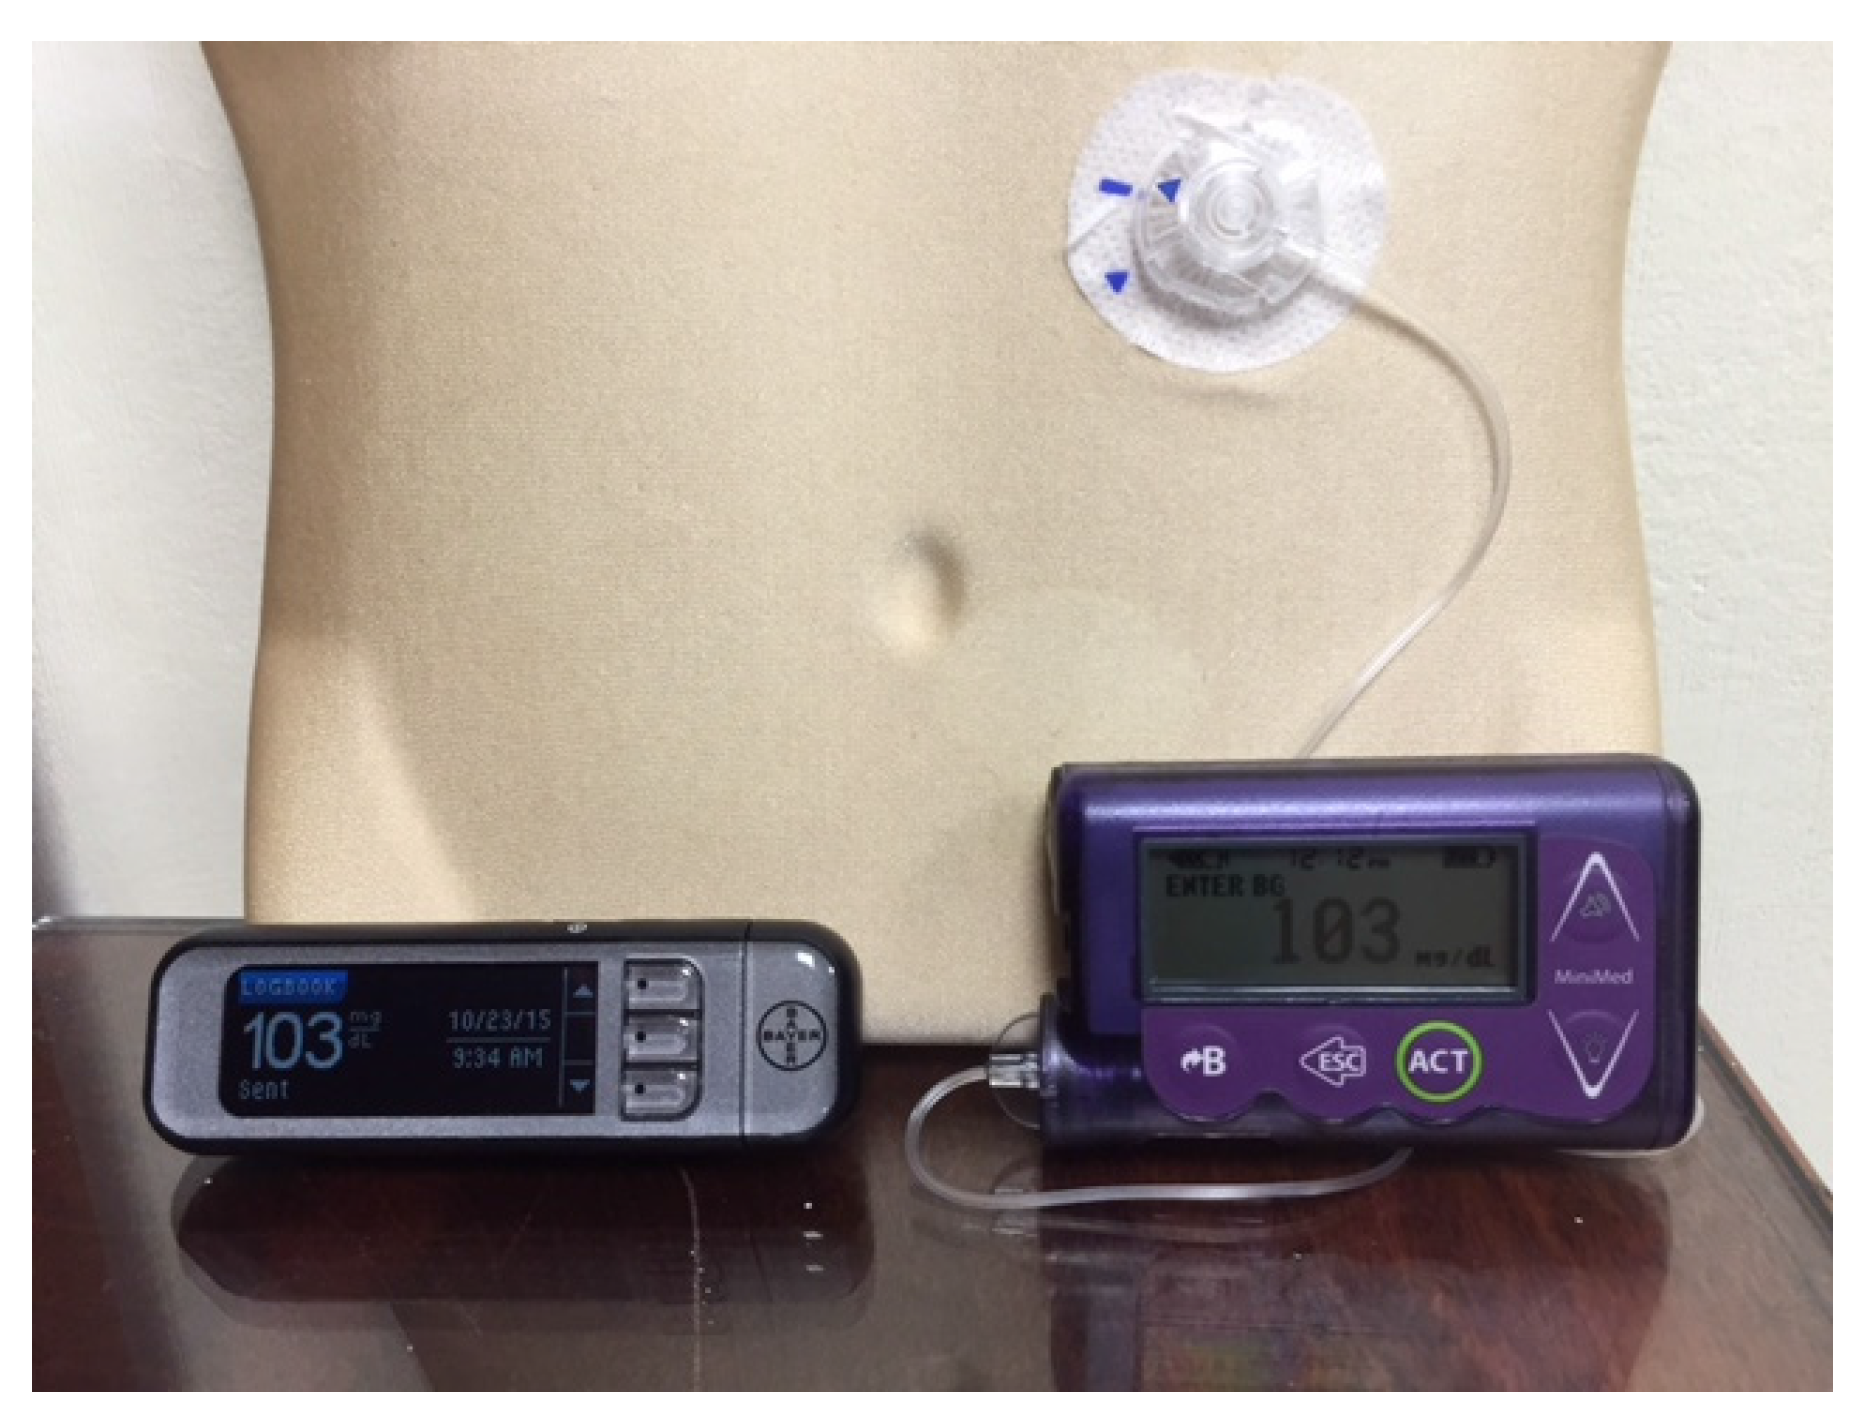 Insulin pumps lead to better clinical outcomes compared with injection -  The Pharmaceutical Journal